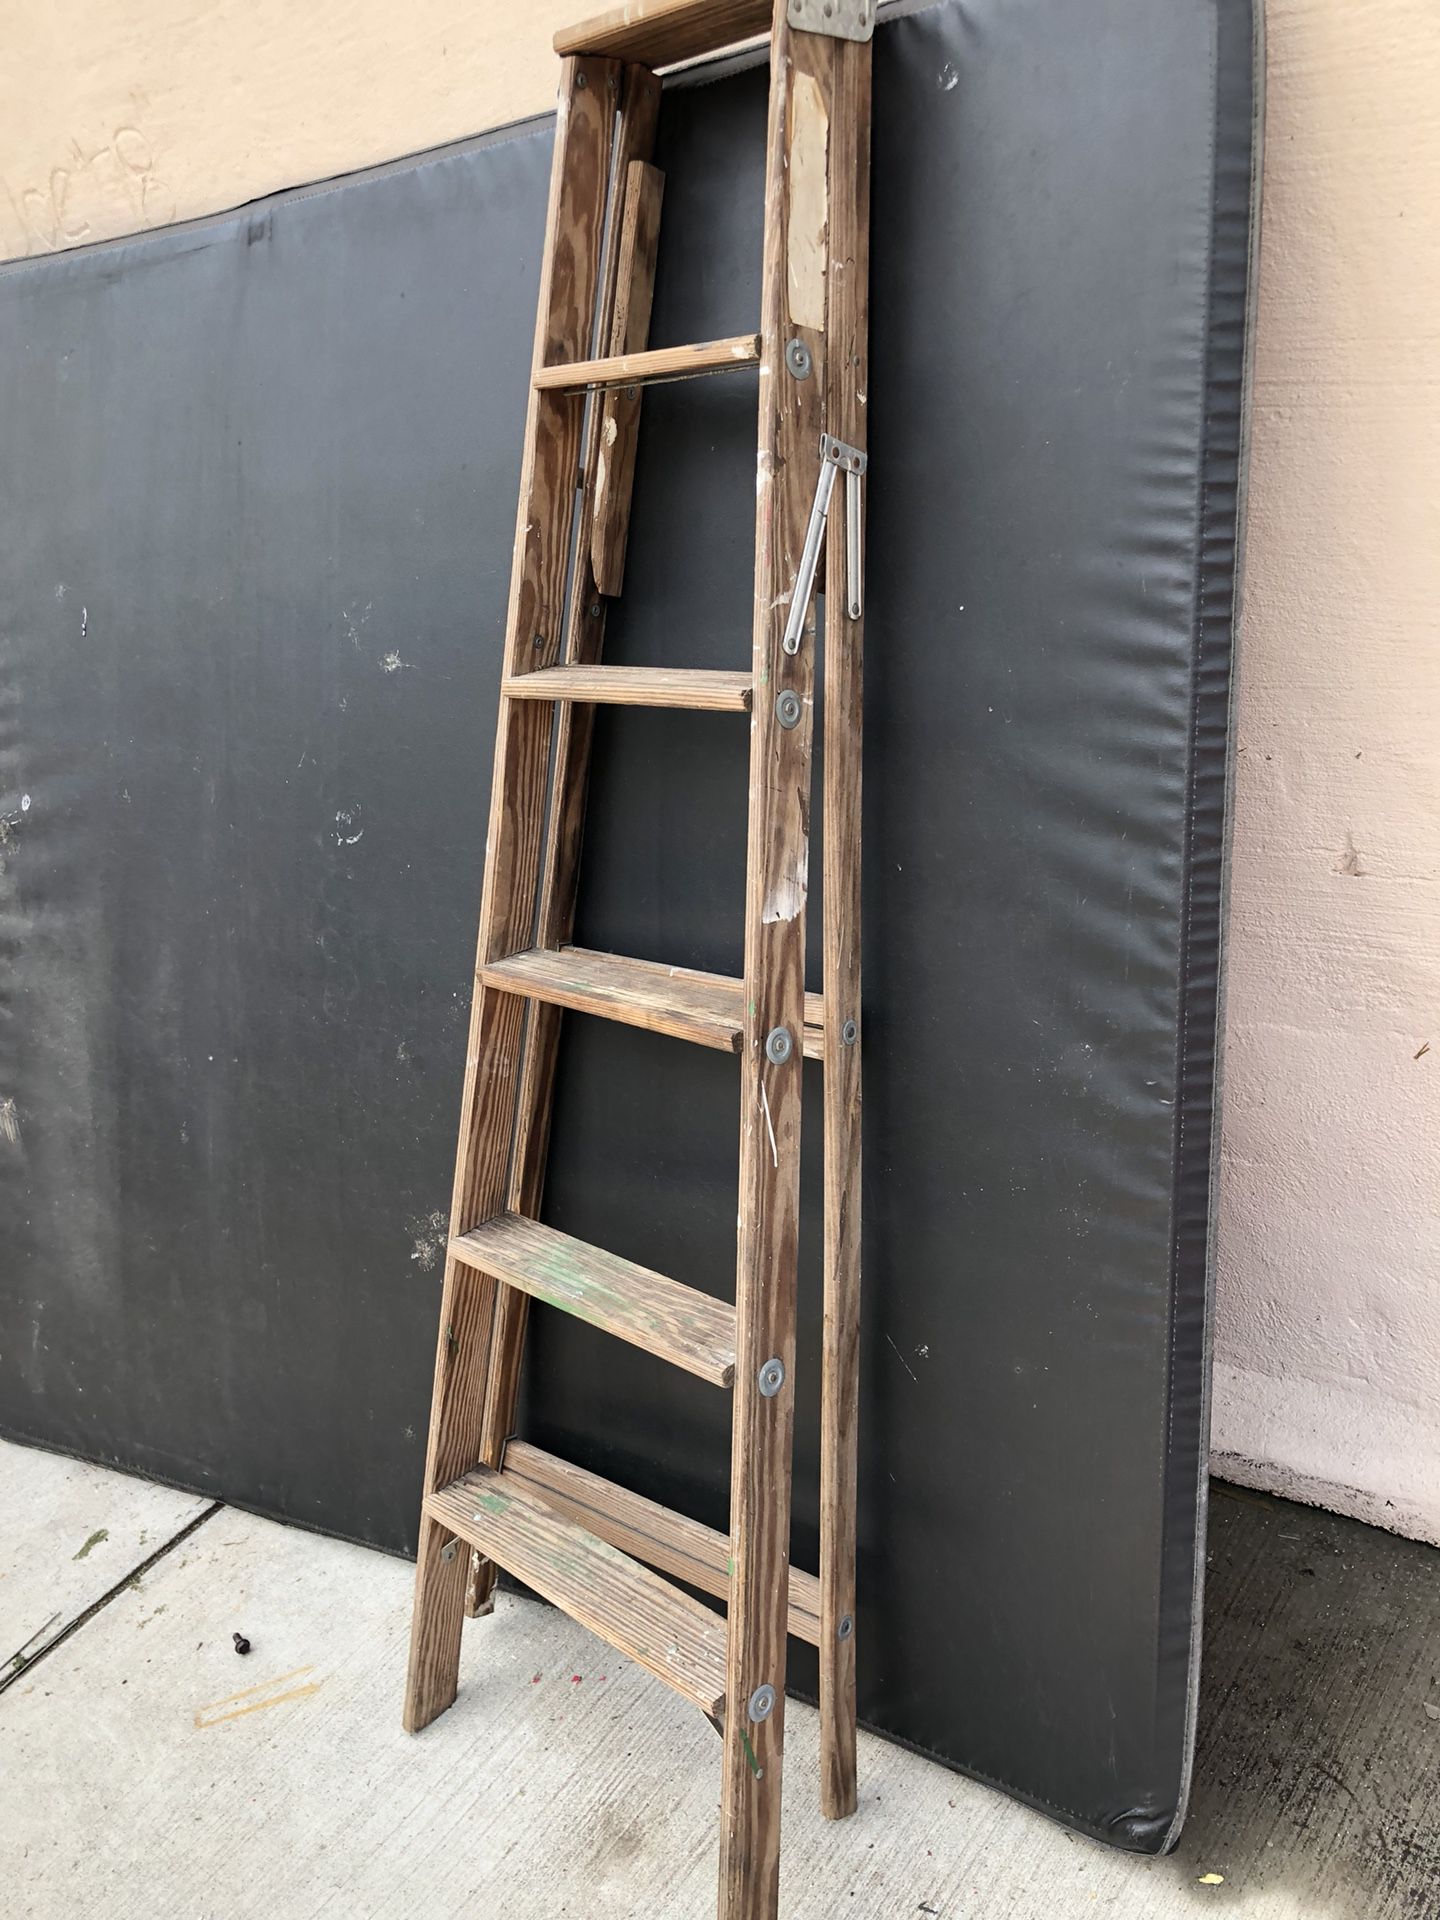 6 or 8 foot ladder